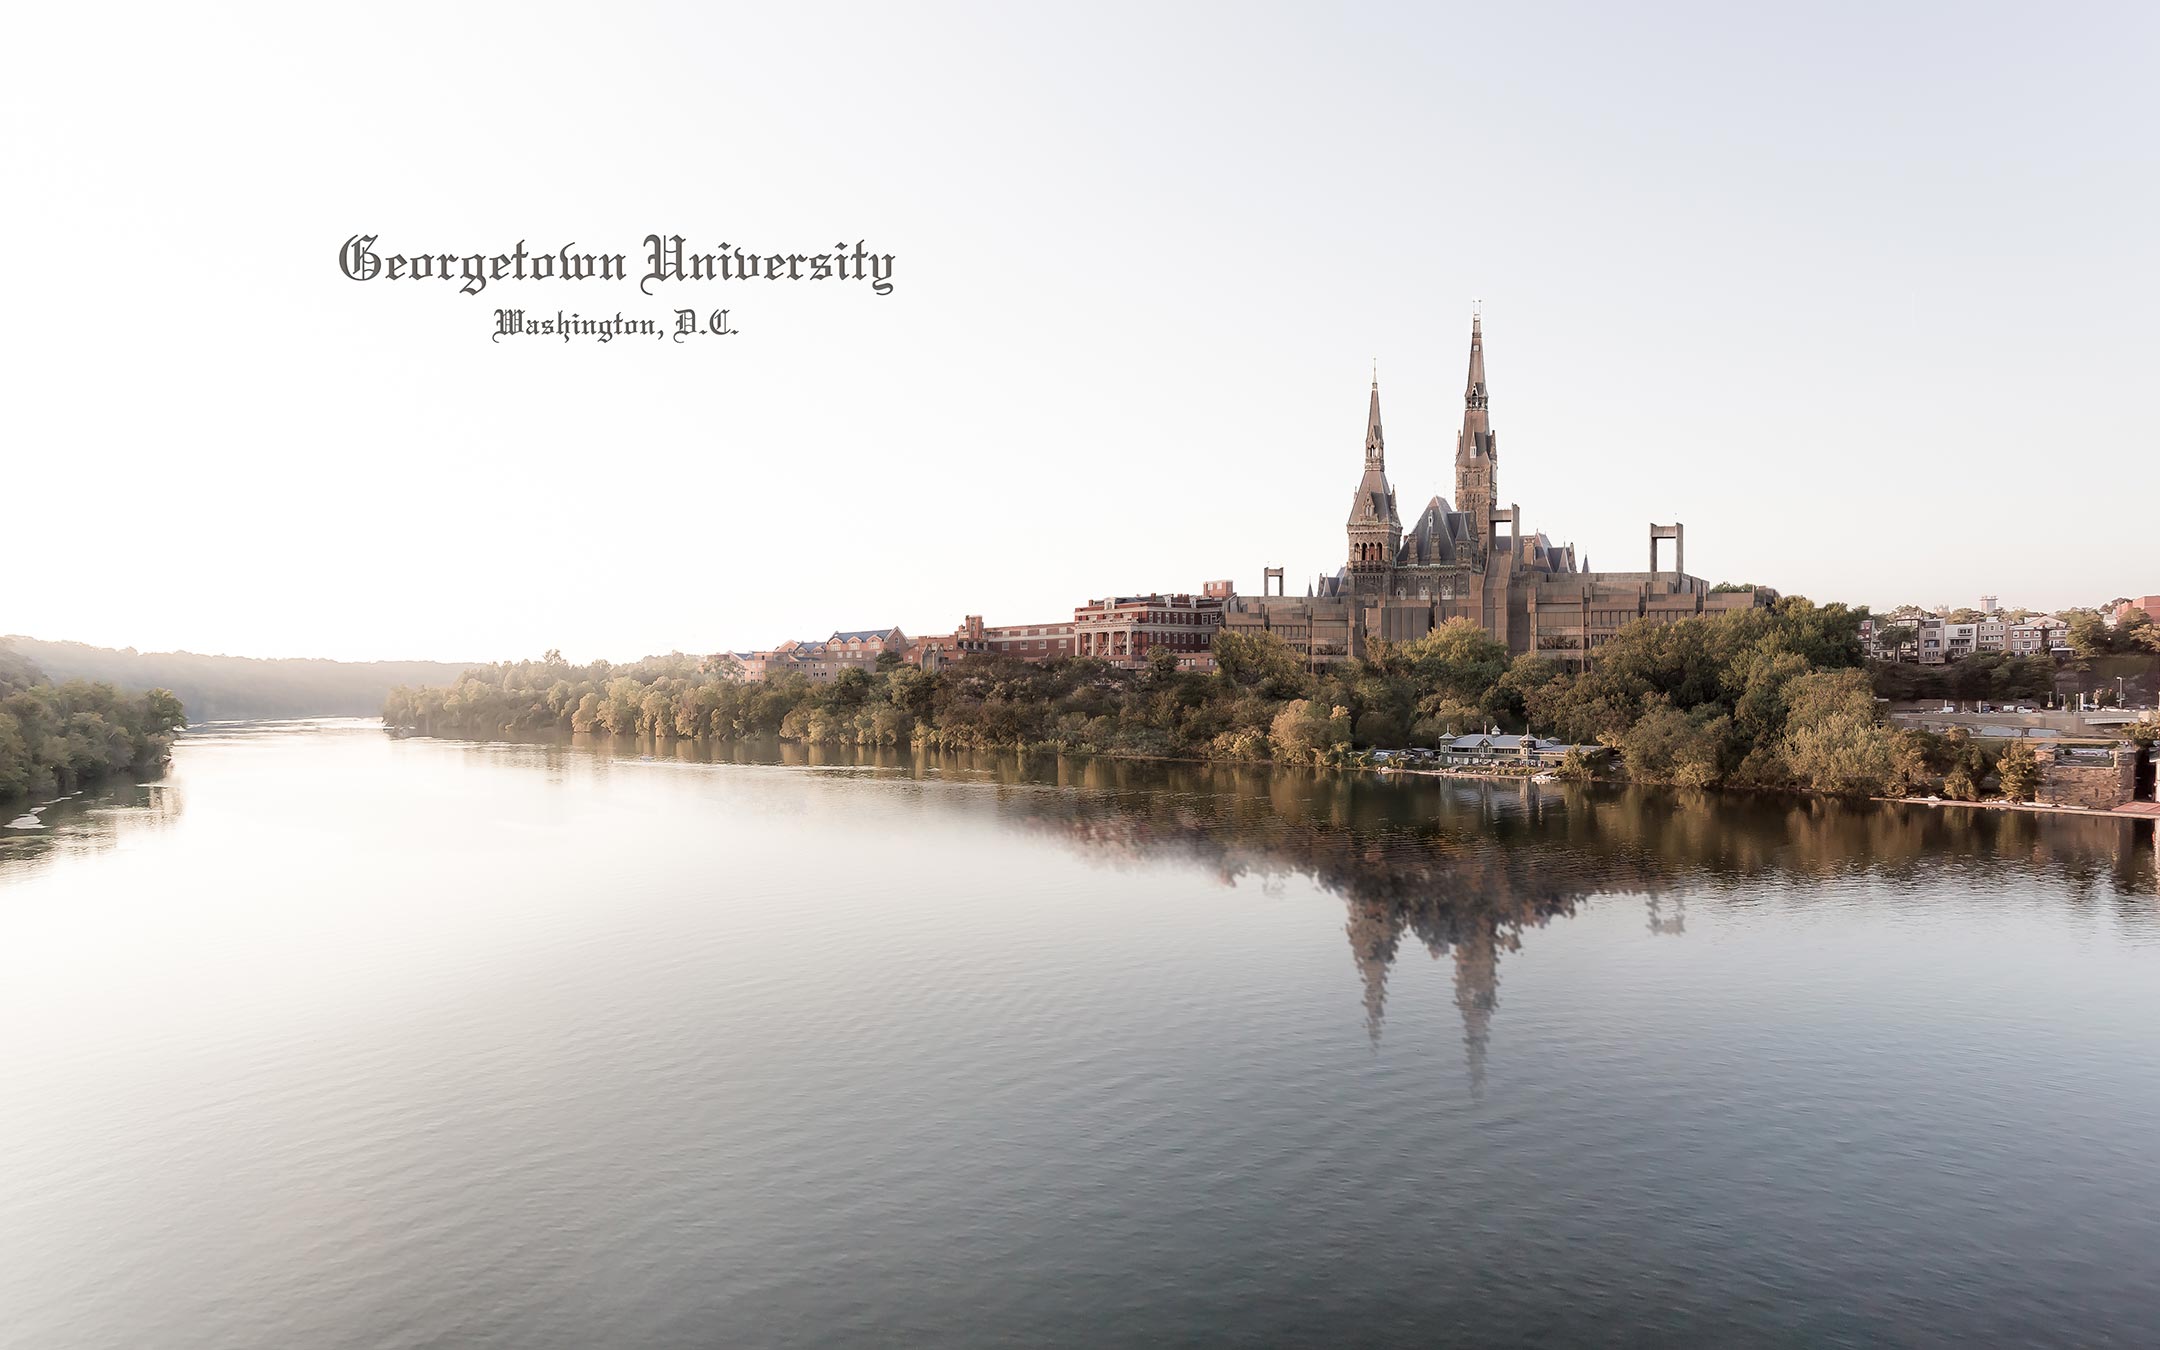 A very high resolution fantasy VAST photo of Georgetown University on the Hudson River; created in Washington, DC by Dan Piech.